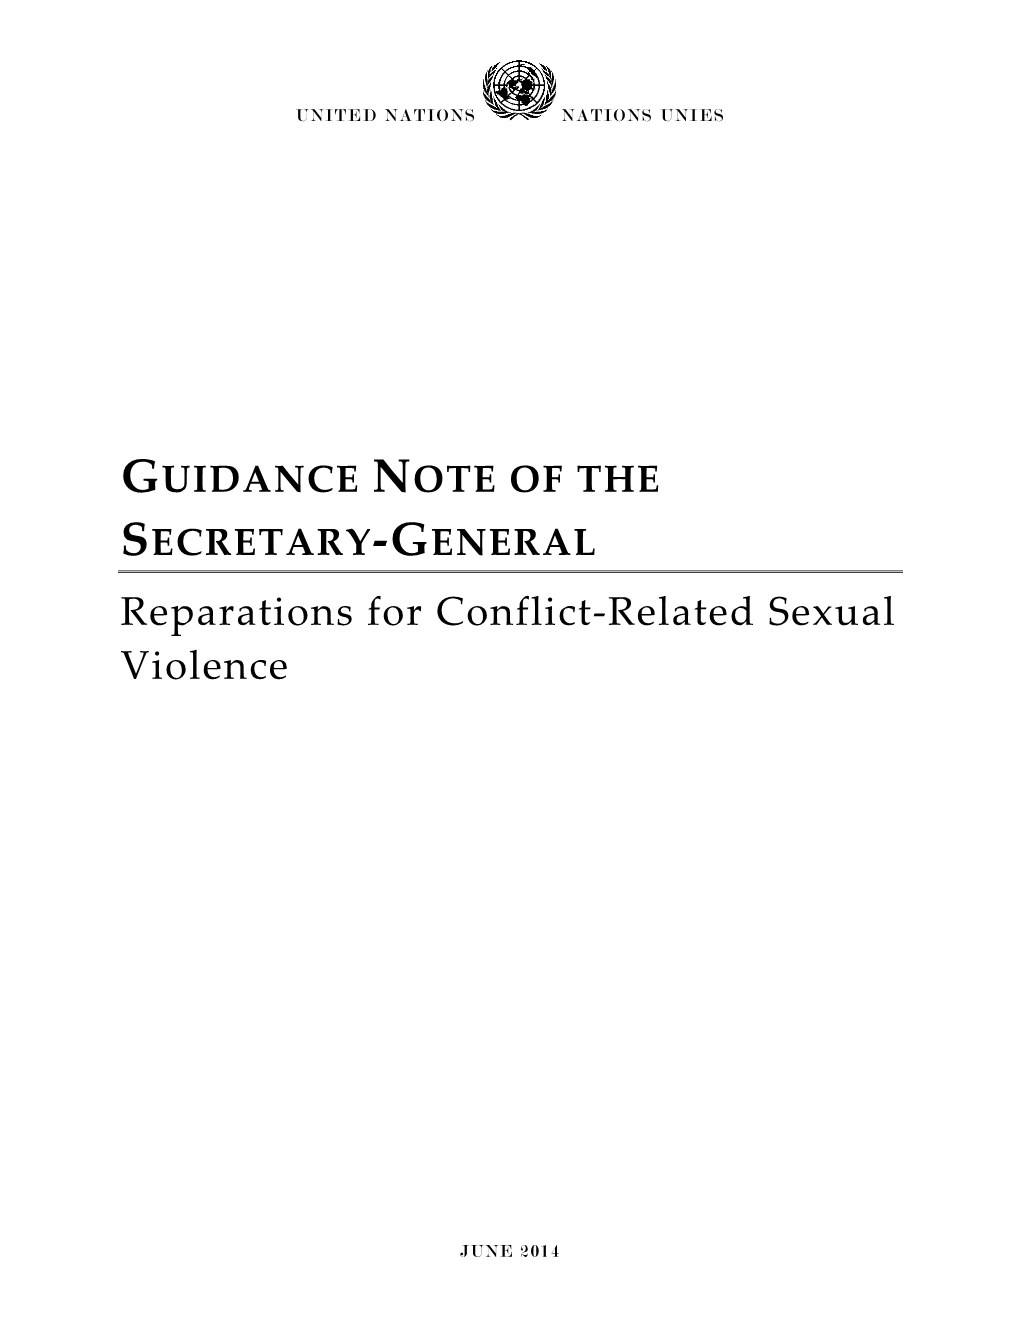 Reparations for Conflict-Related Sexual Violence